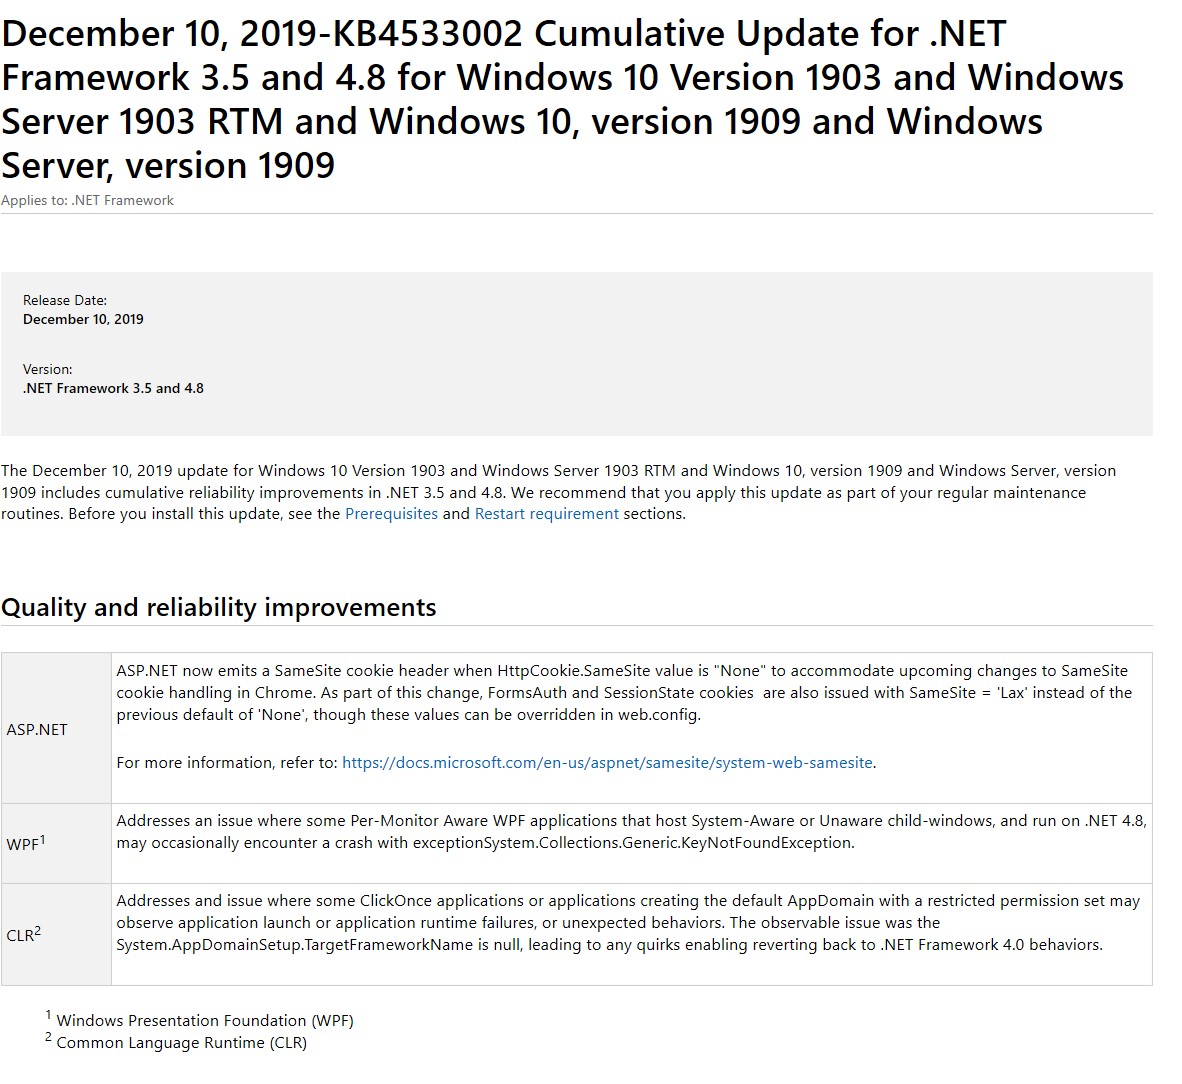 It's Patch Tuesday! And here is the info for the two Cumulative Updates for Win 1903 & 1909 6c211e3d-3d2f-4328-9295-de399f3e01c0?upload=true.jpg